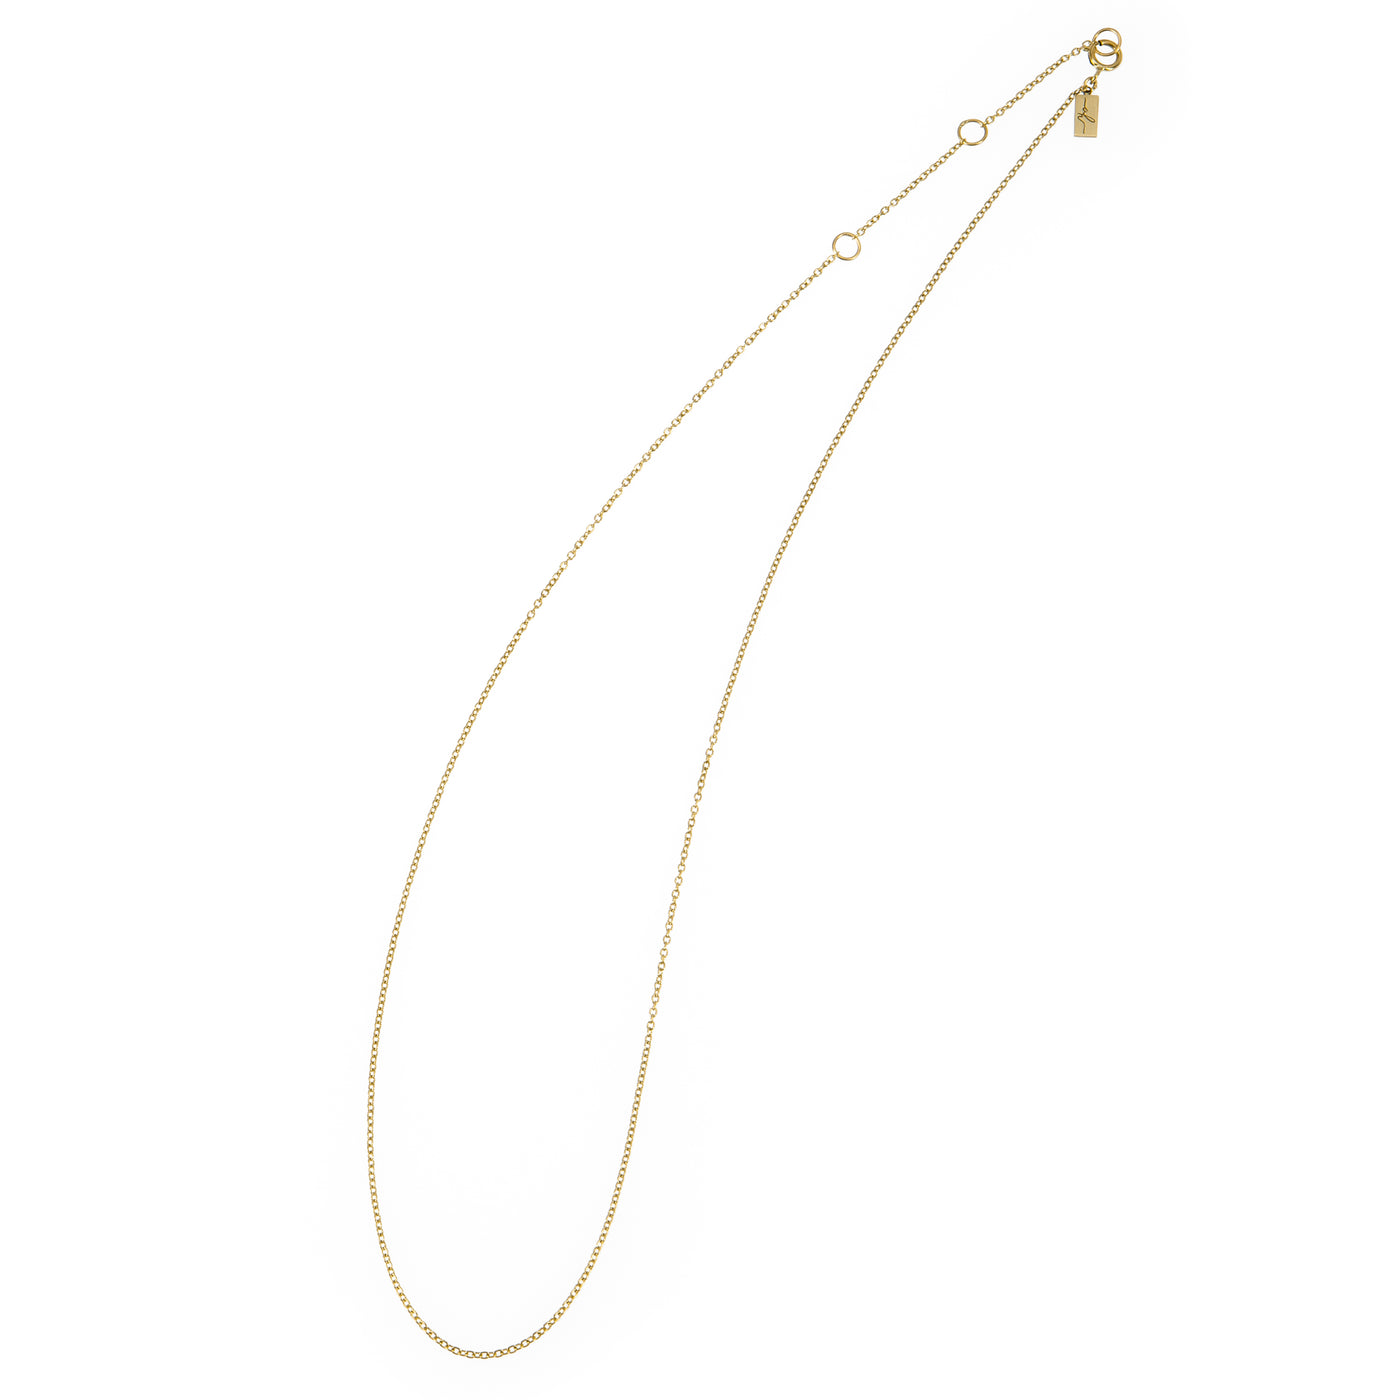 Ethical gold necklace. This eco-friendly Simple Chain is handmade in Cape Town in recycled gold from e-waste.